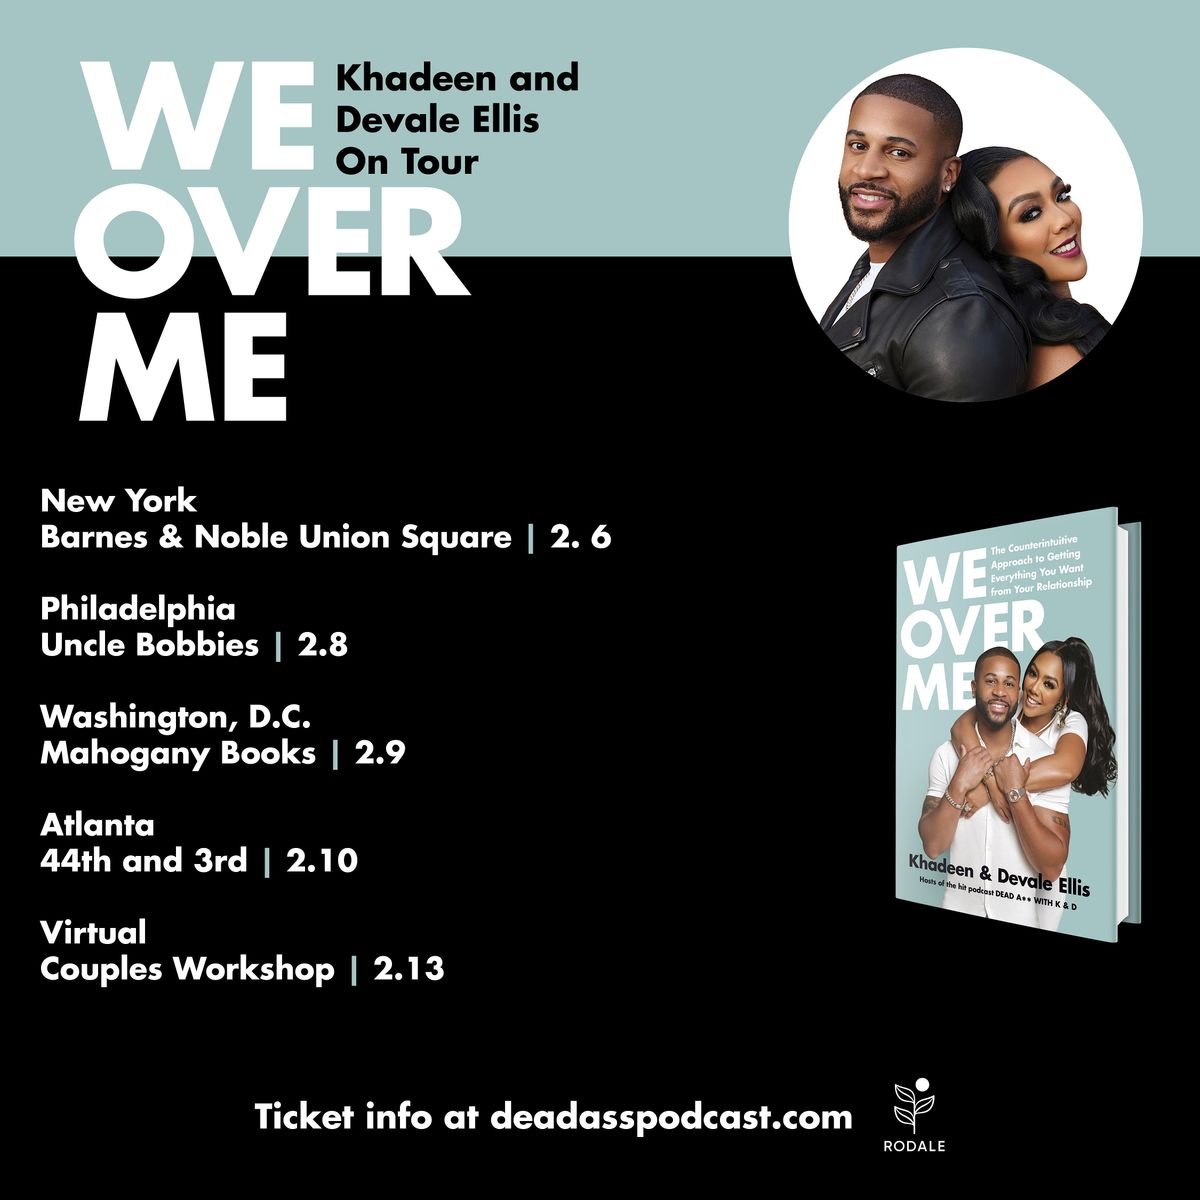 We Over Me authors Khadeen Ellis, Devale Ellis book discussion and signing